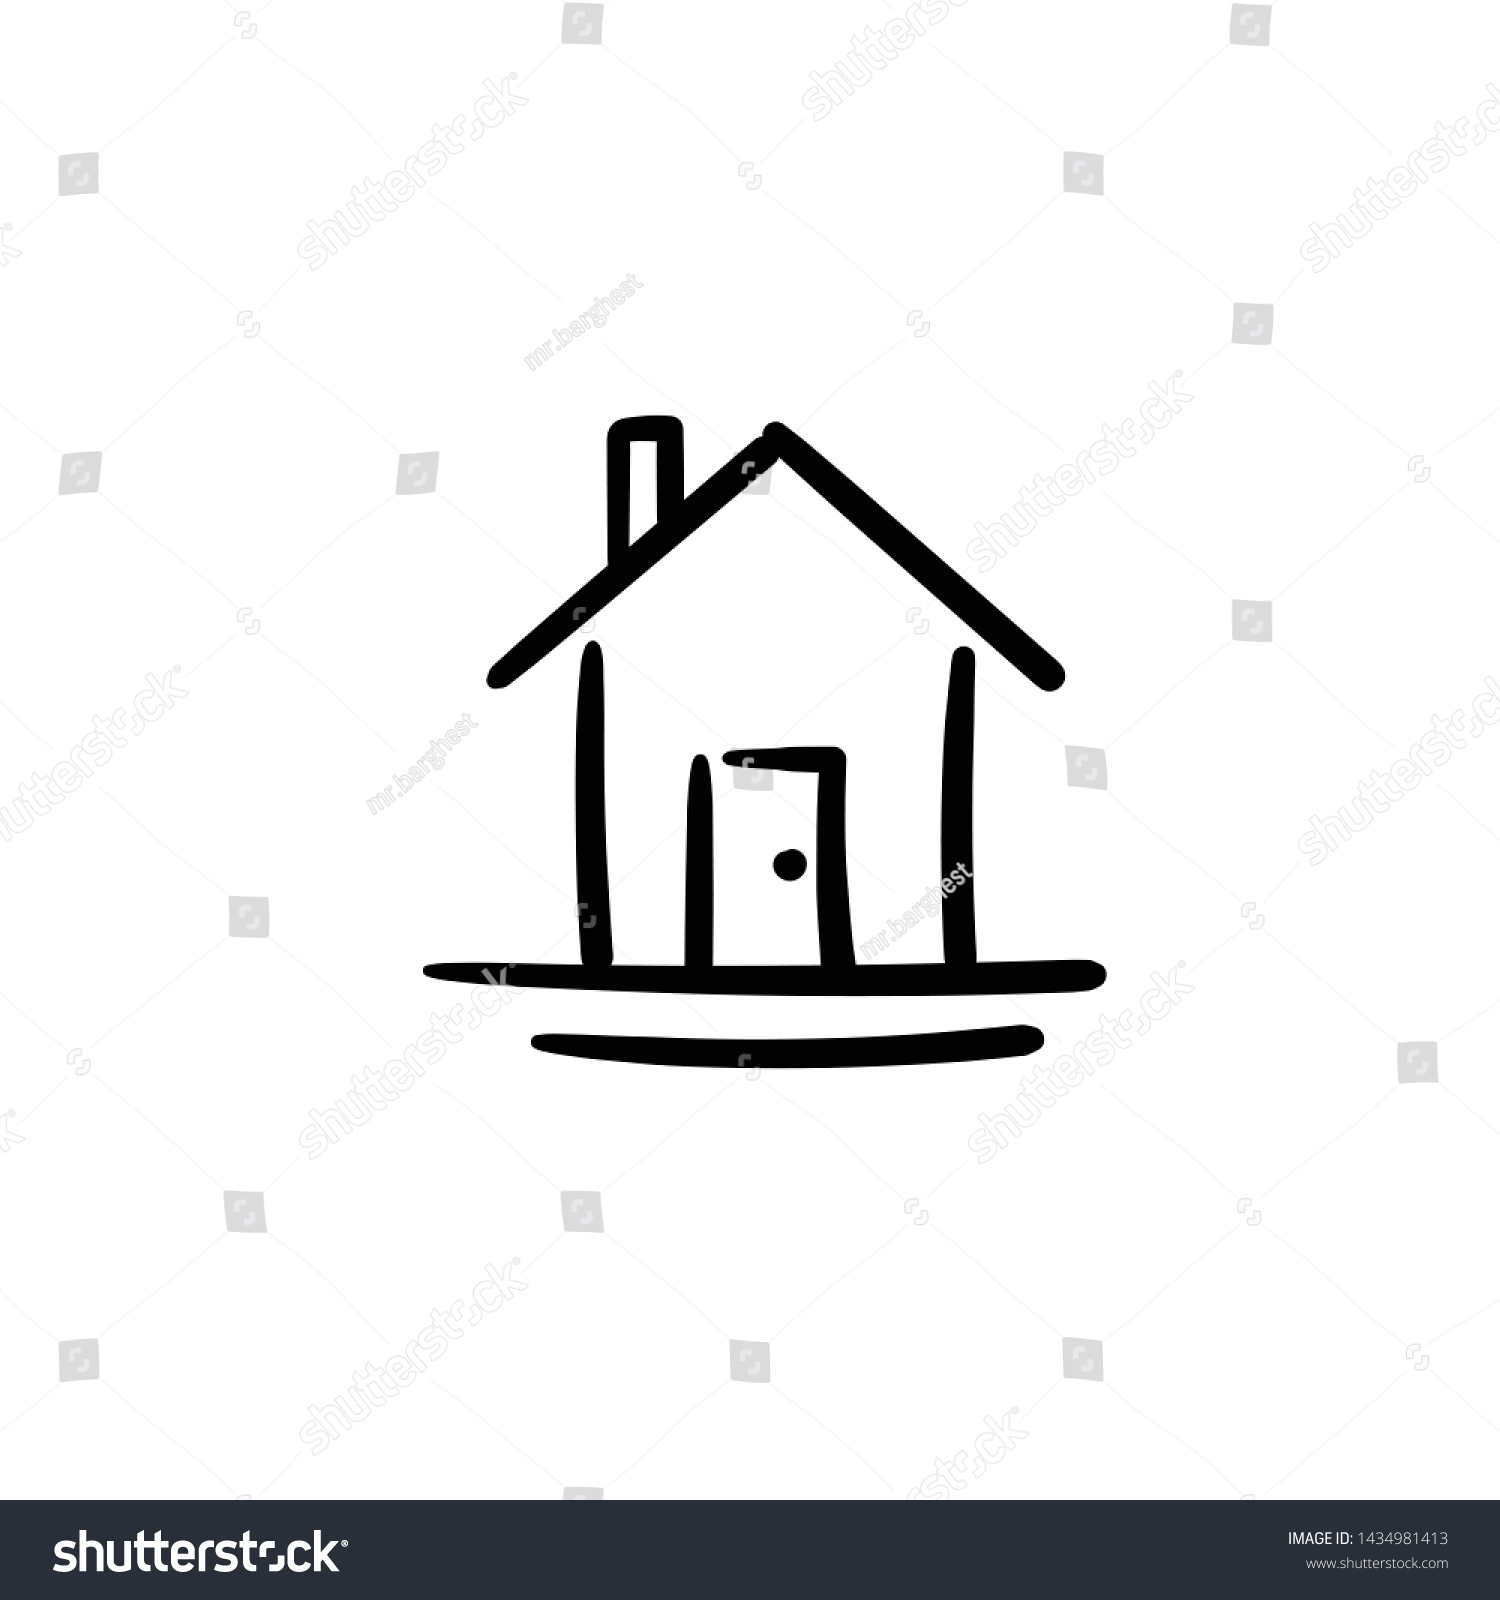 Hand drawn house. Simple vector icon #1434981413